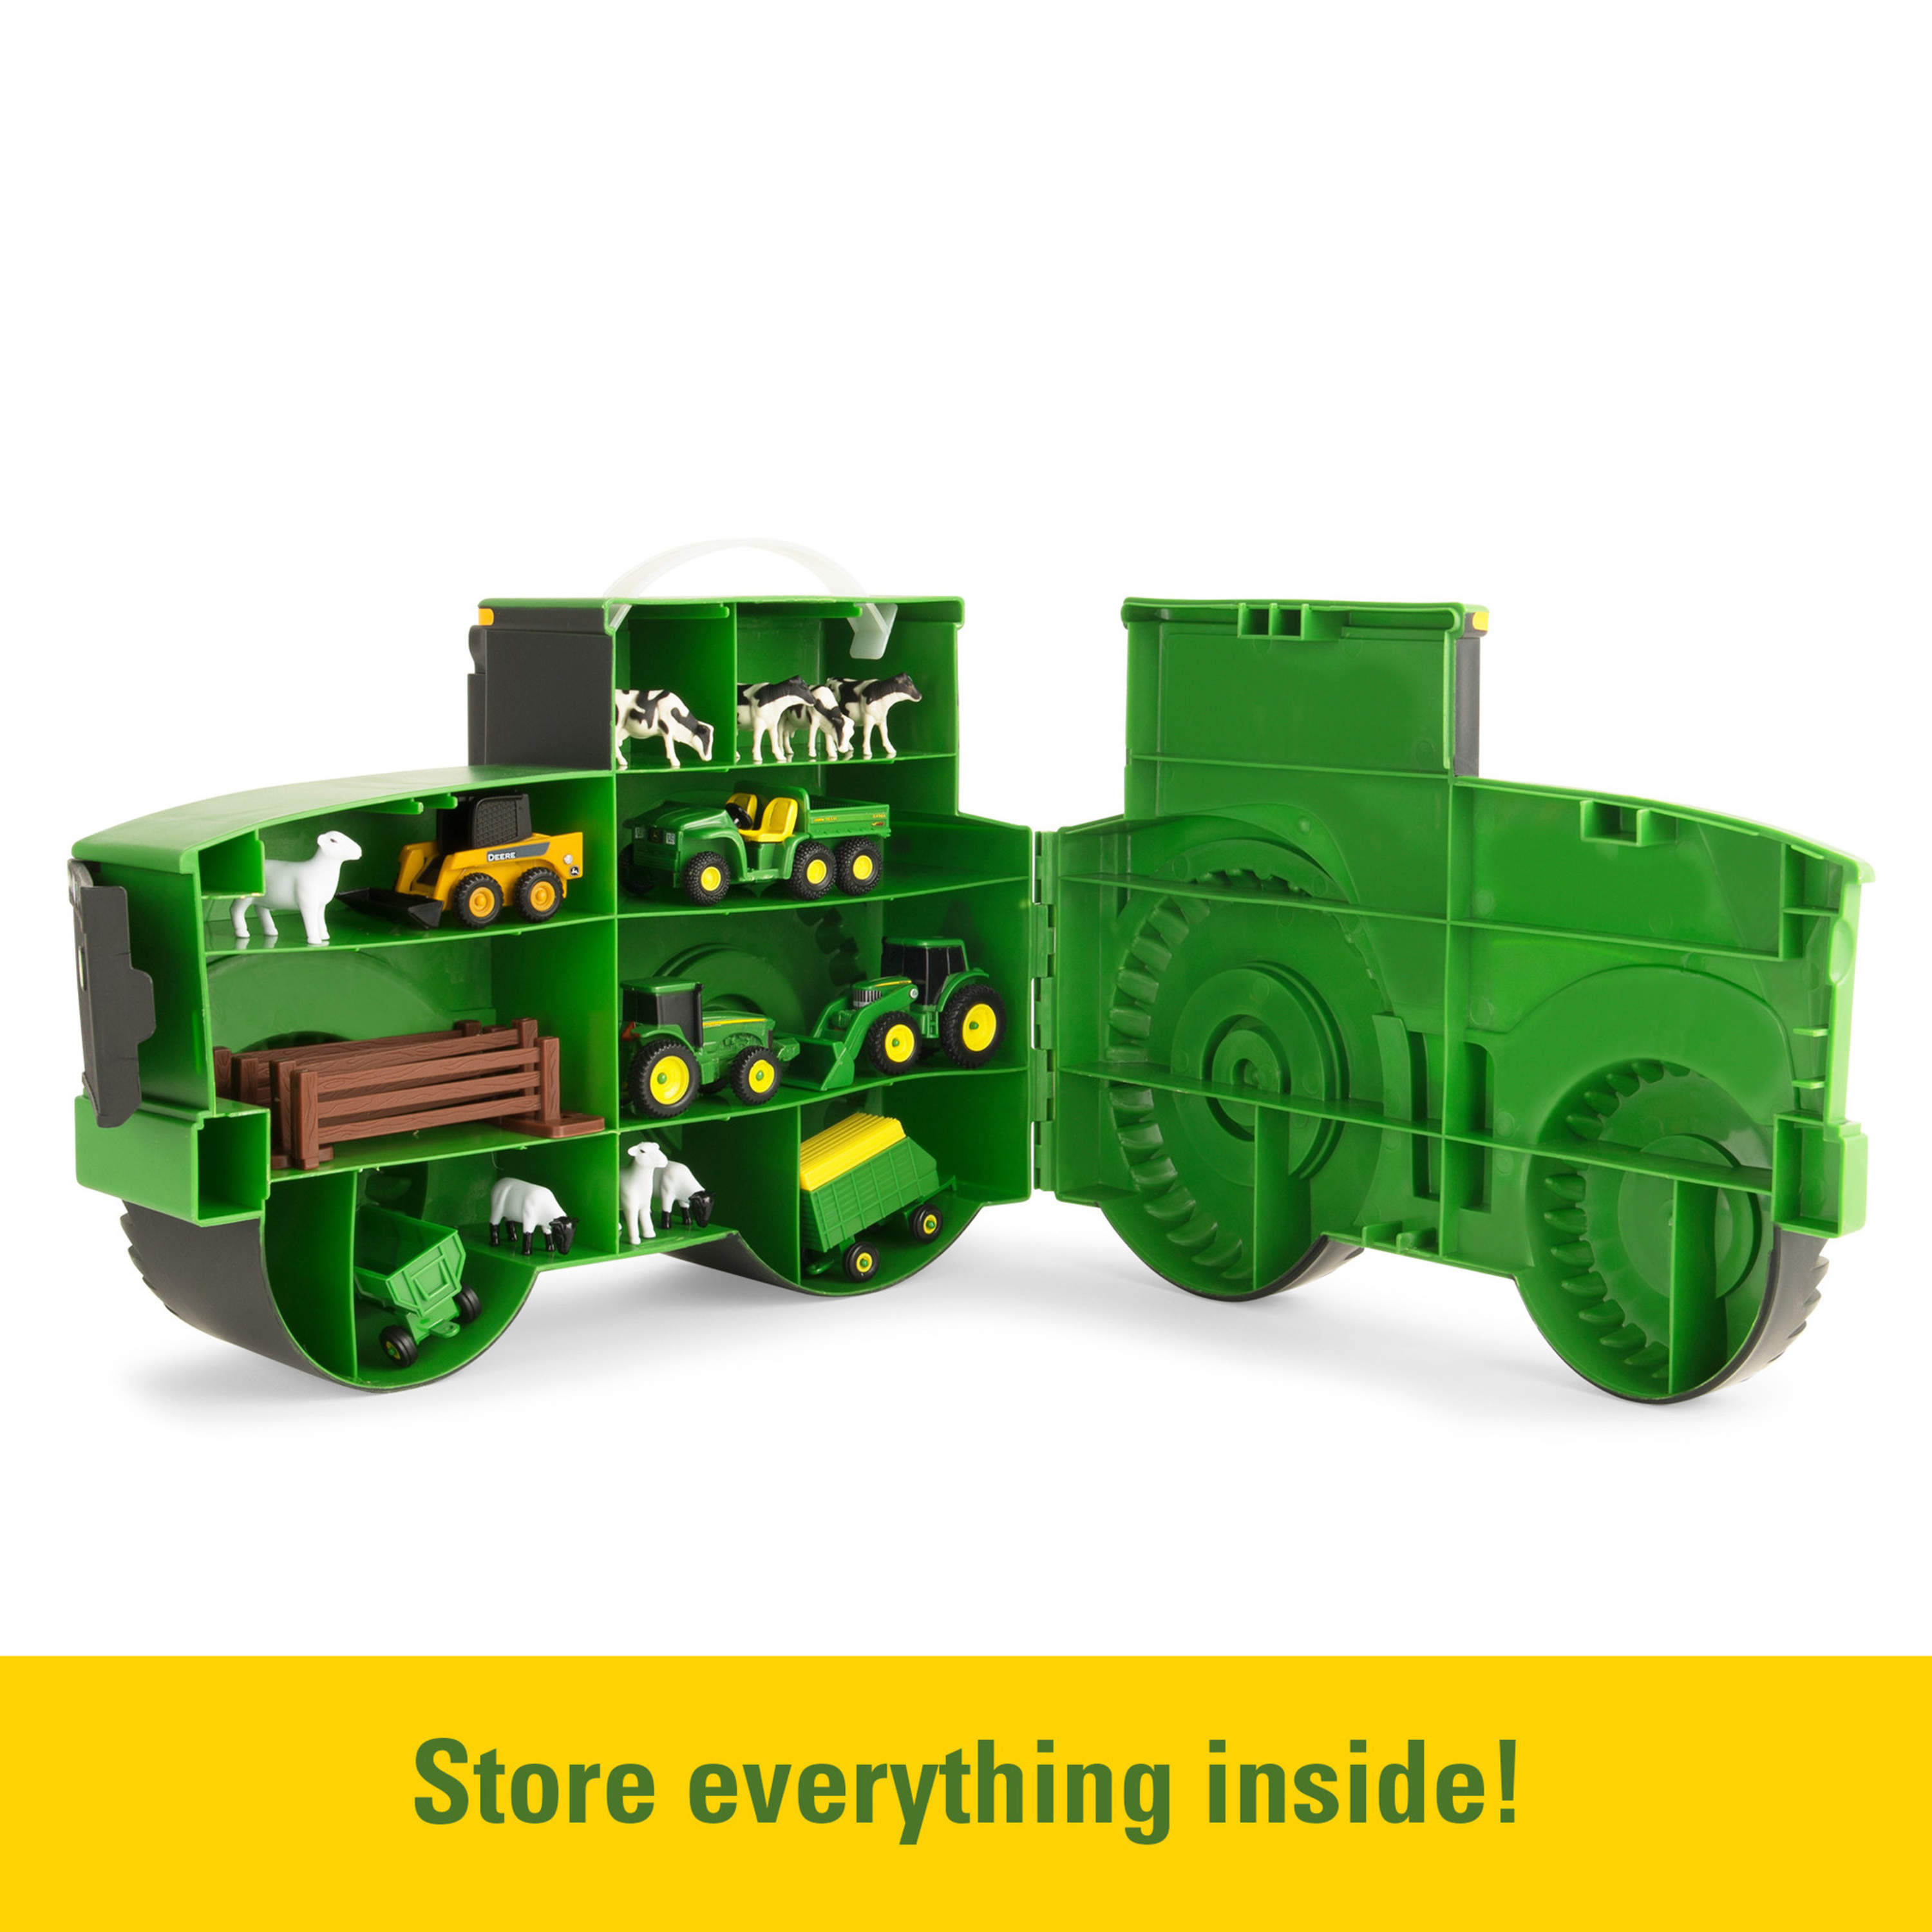 John Deere Tractor Toy Carry Case Value Farm Vehicle Playset, with Handle (18 Pieces) - image 2 of 7